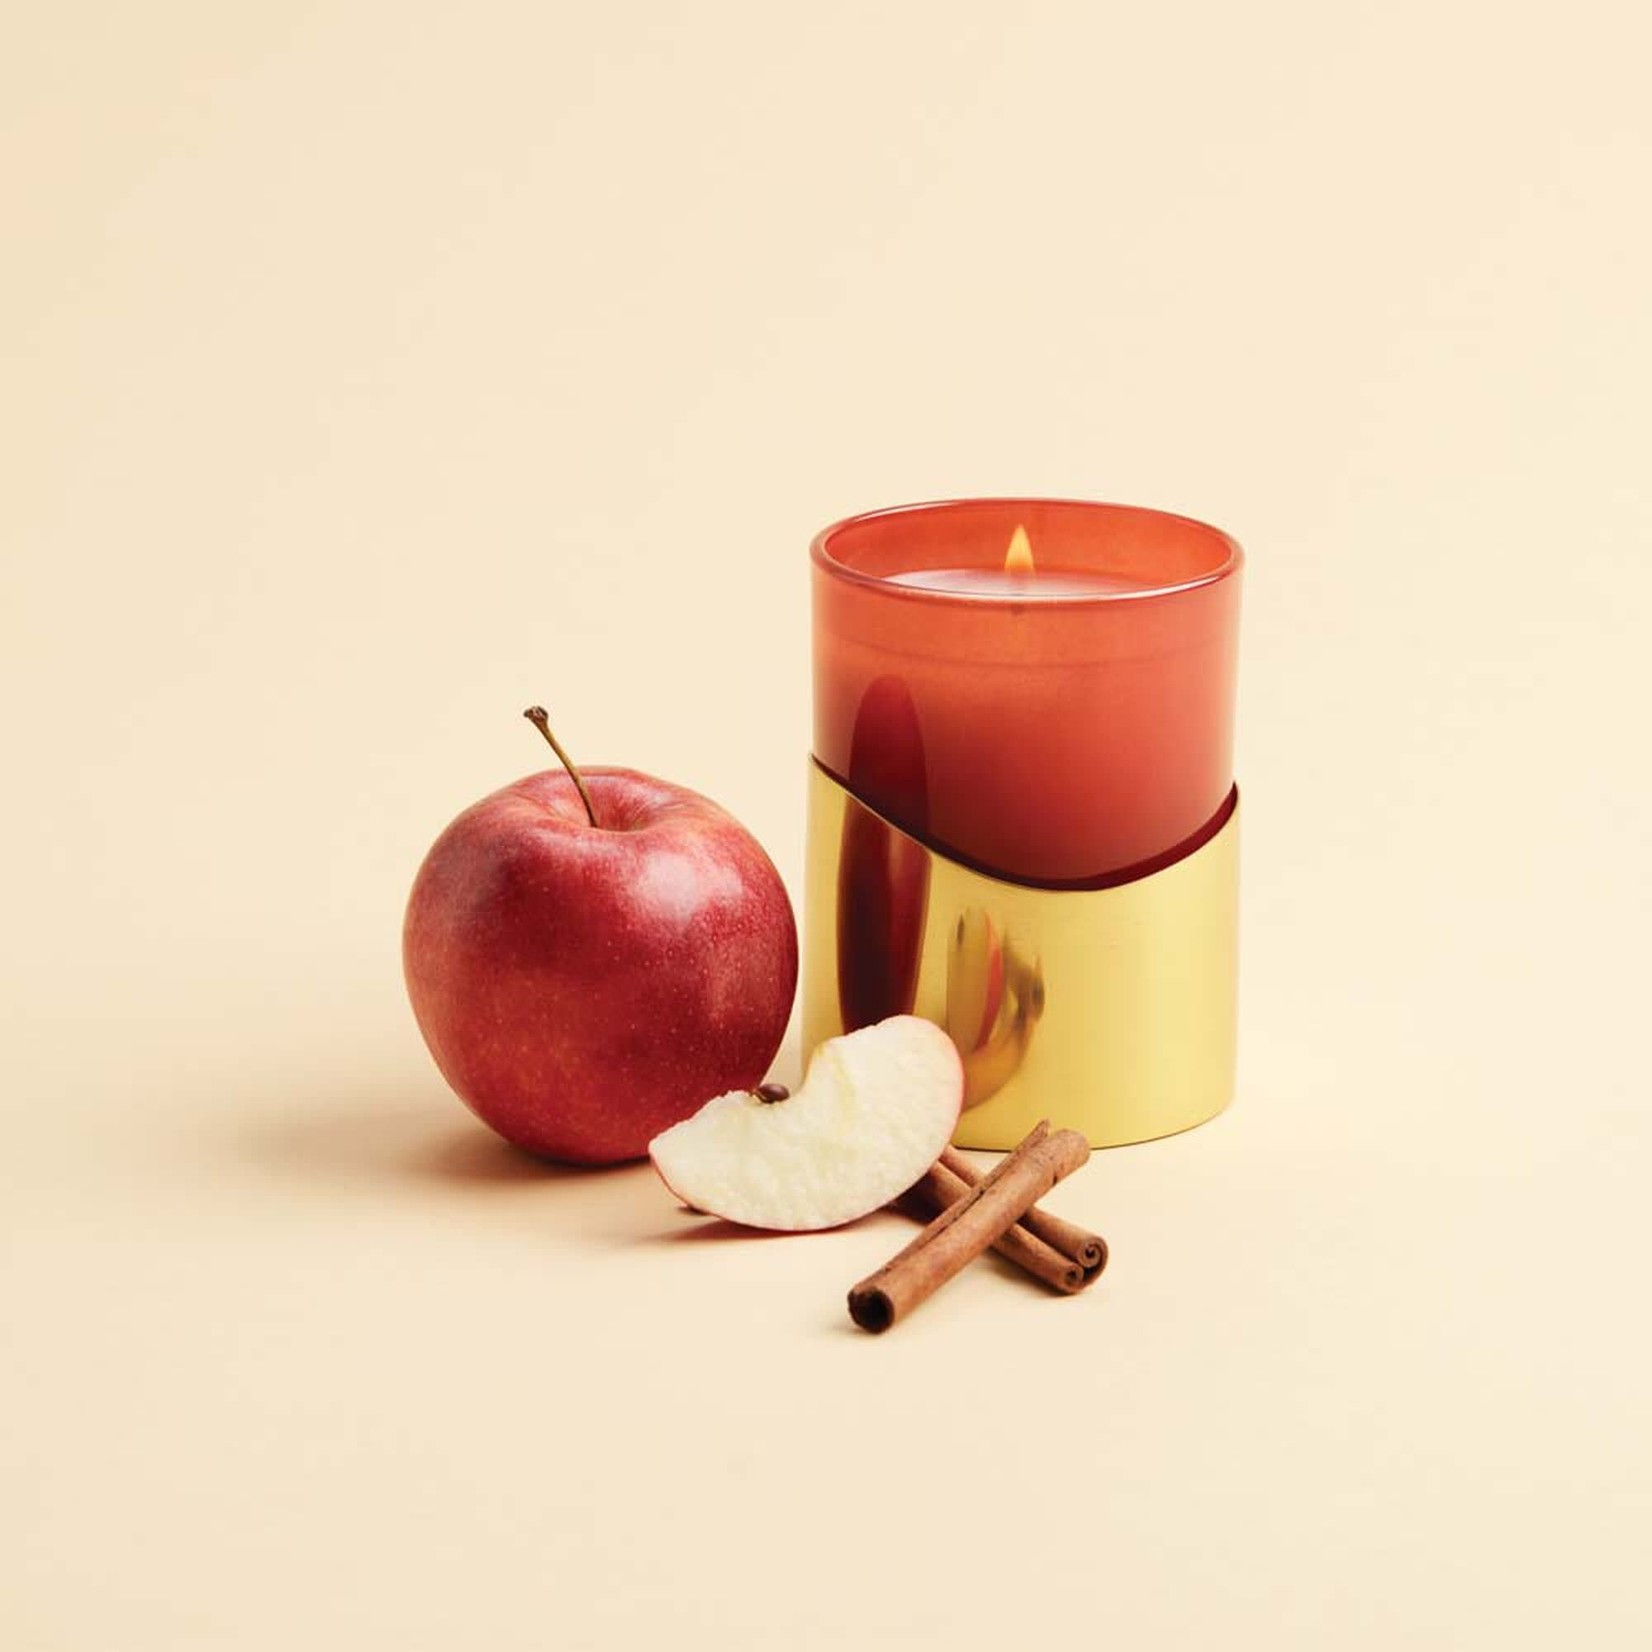 Thymes Simmered Cider Poured Candle